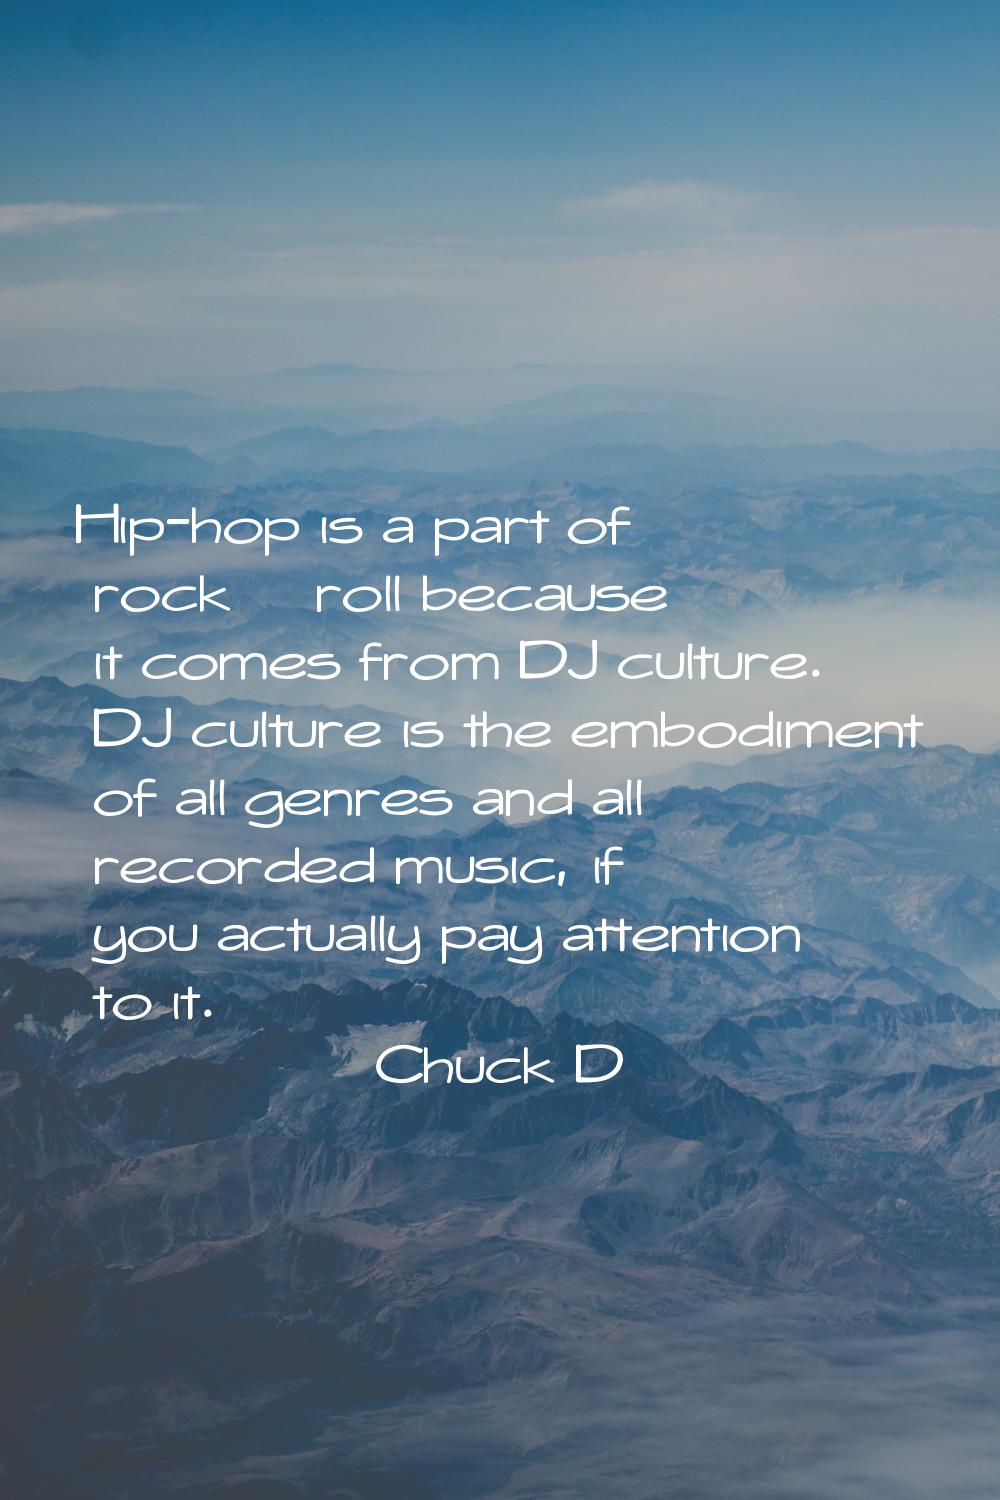 Hip-hop is a part of rock & roll because it comes from DJ culture. DJ culture is the embodiment of 